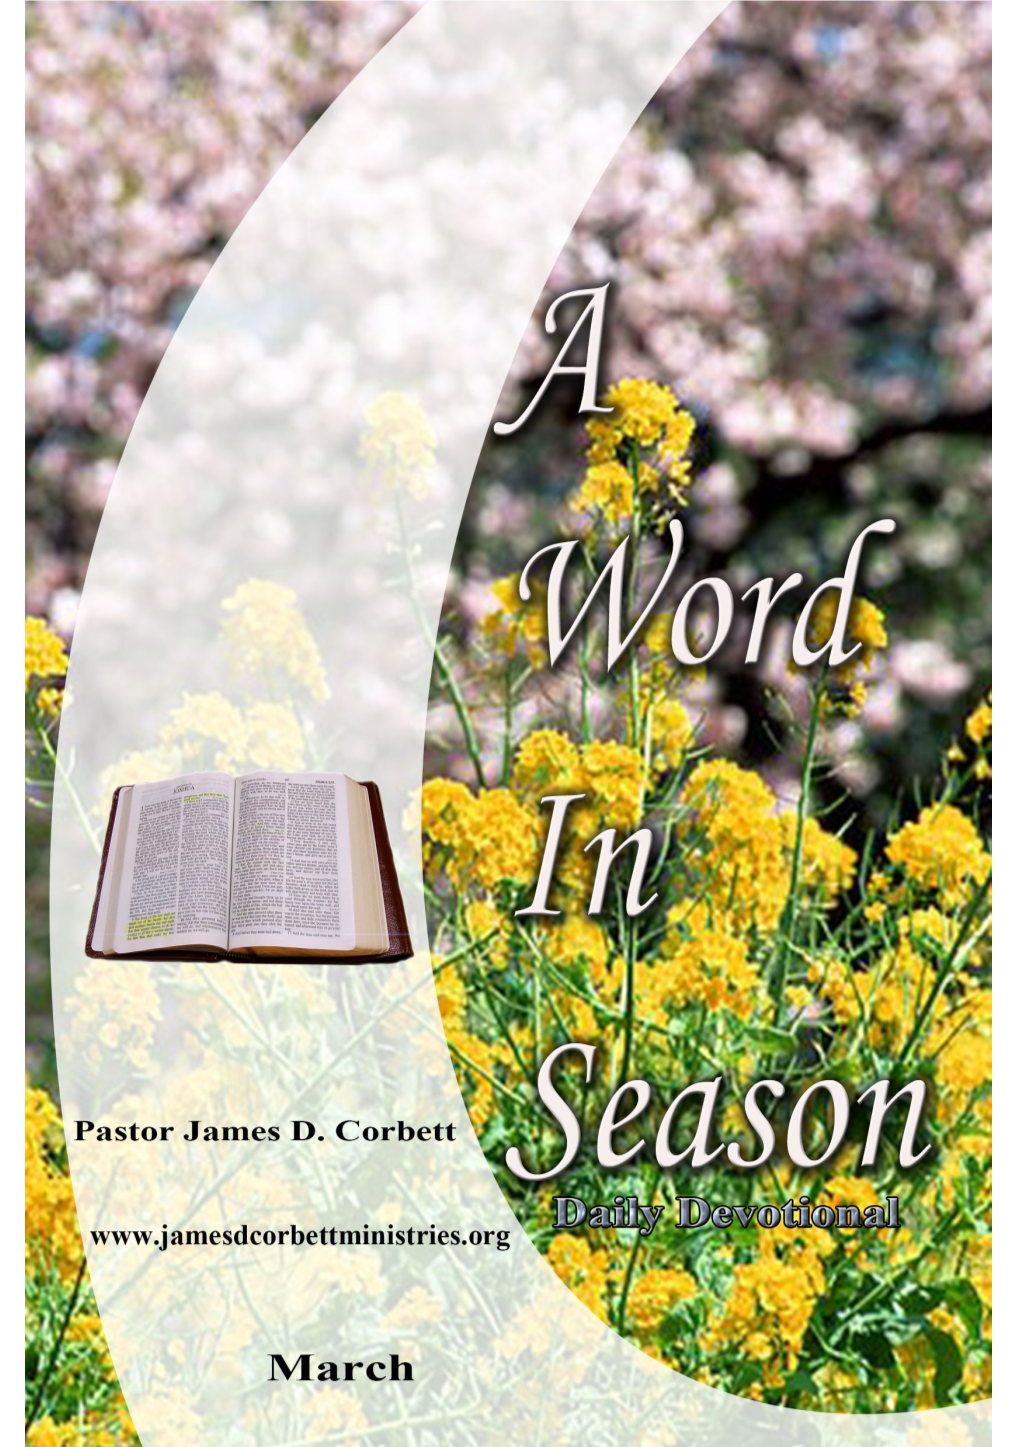 James D. Corbett Ministries, All Rights Reserved